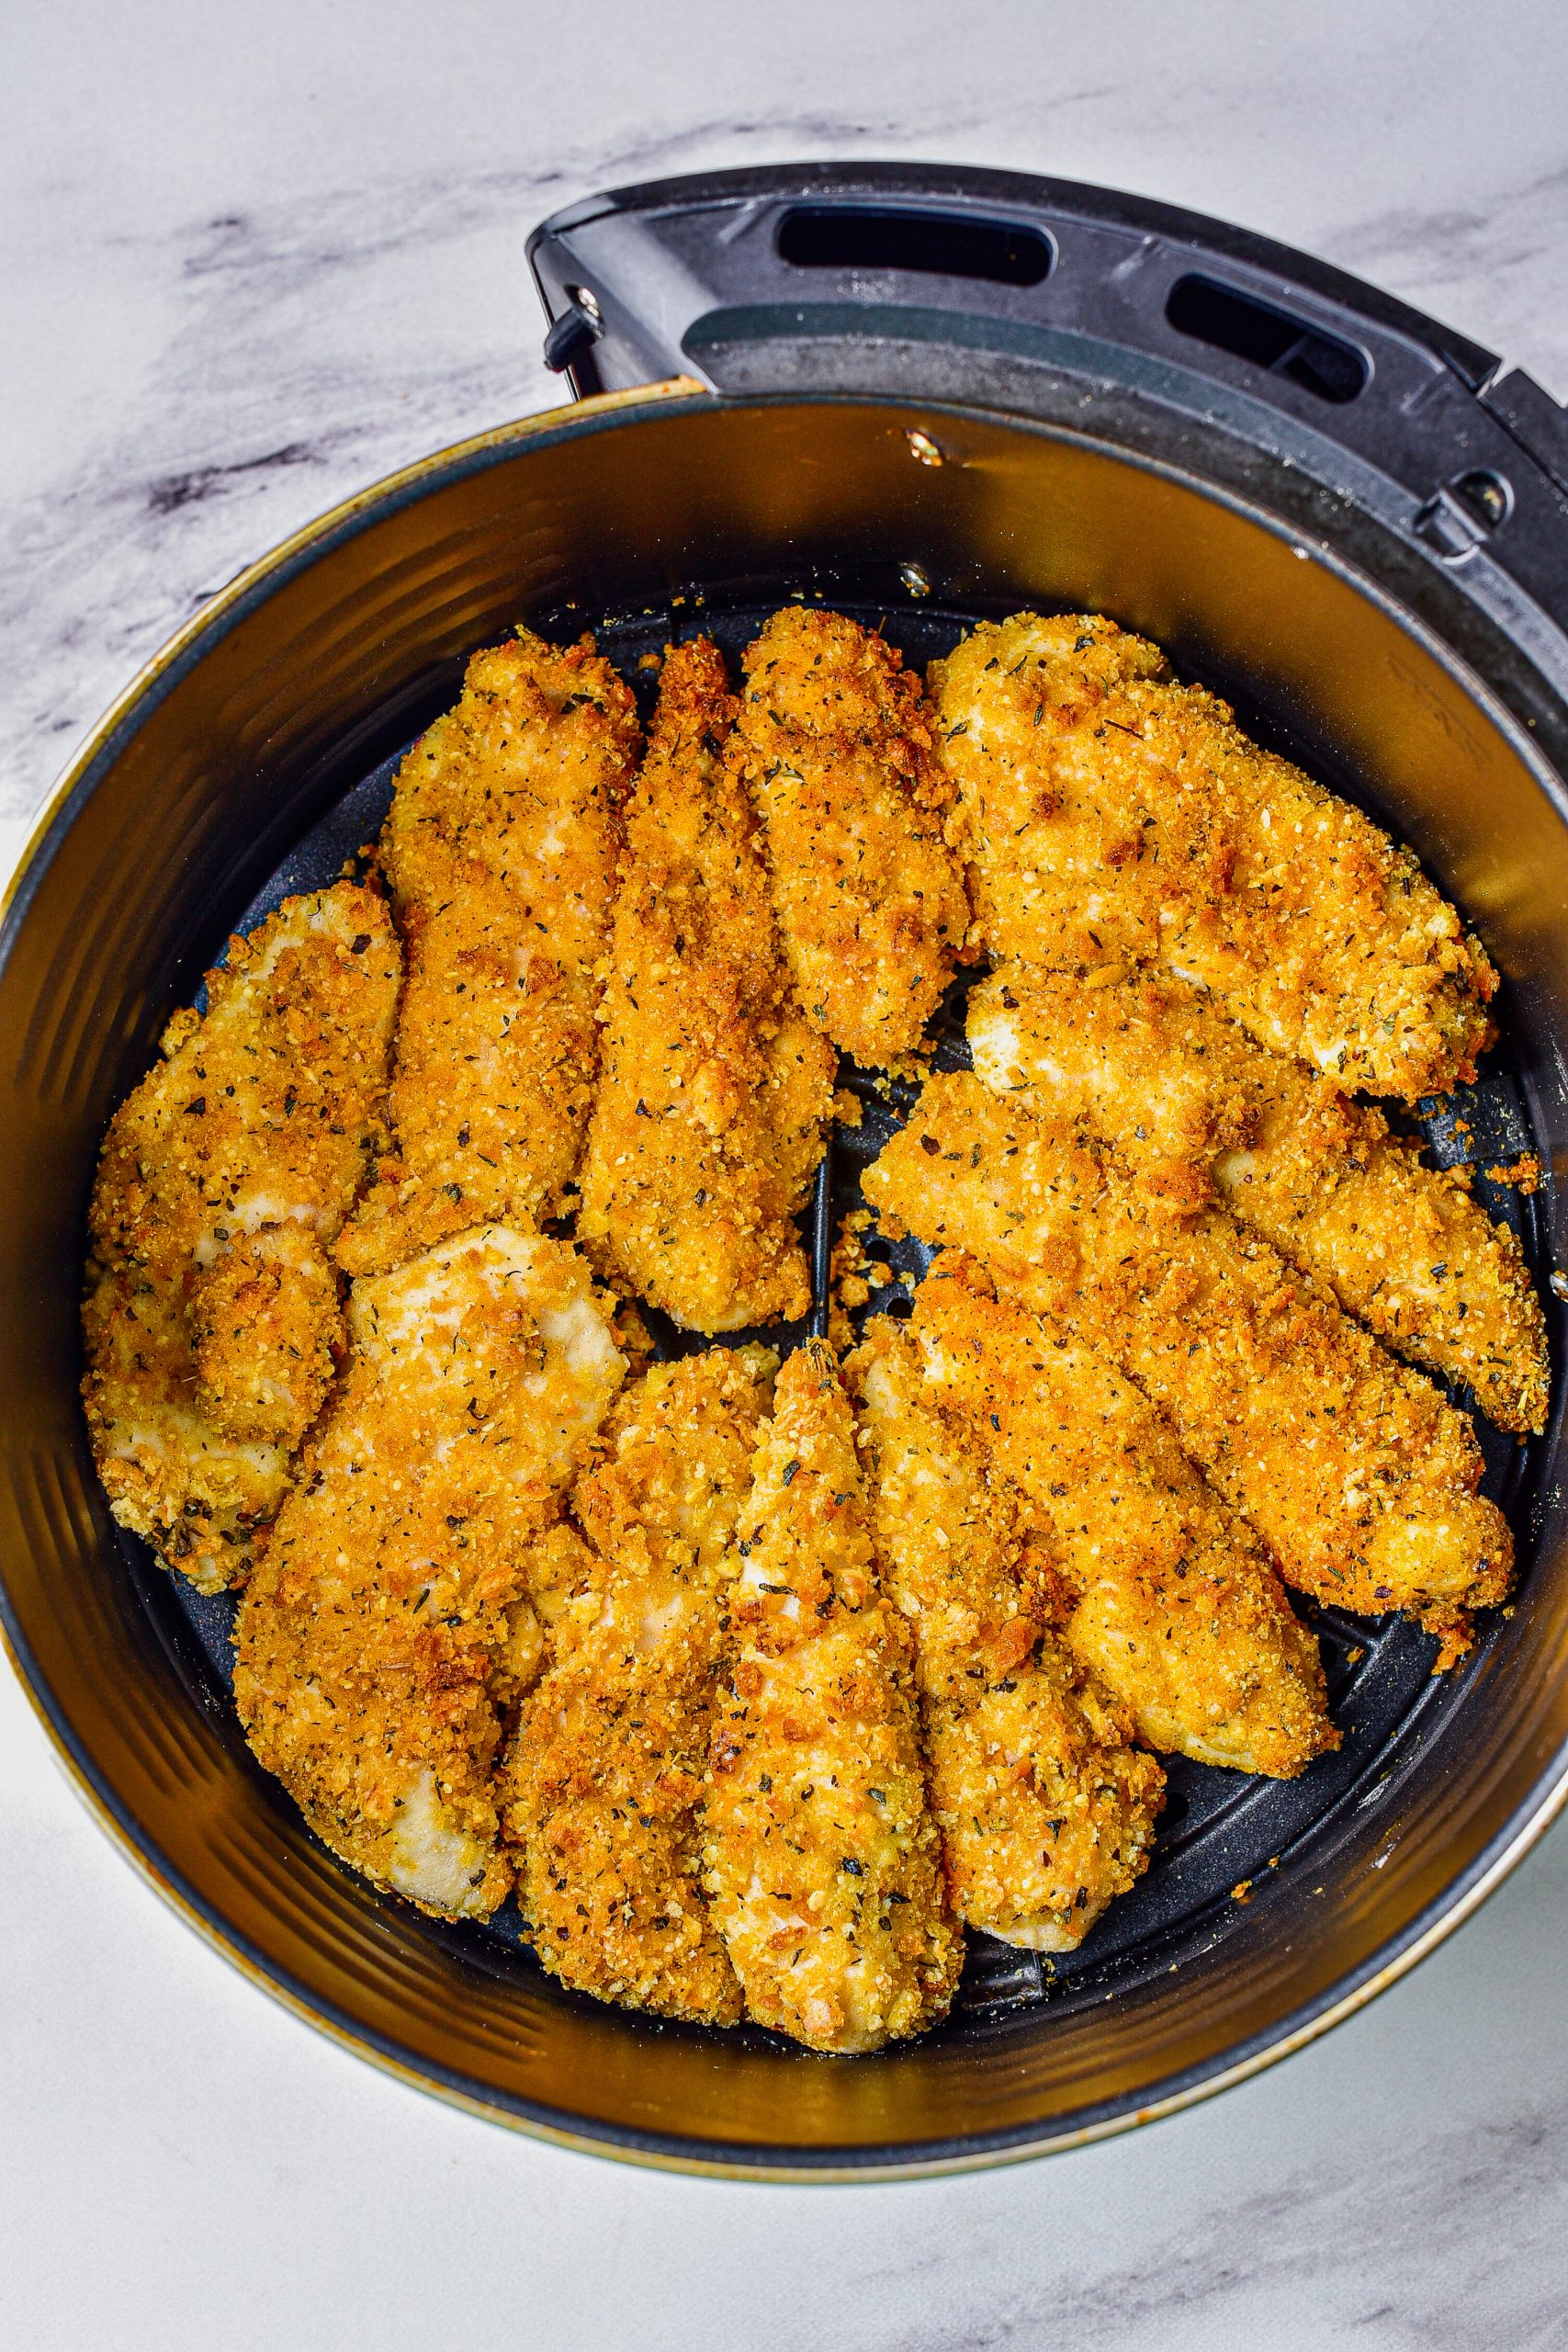 Place the chicken into a basket for the air fryer, and cook for 9-10 minutes at 400 degrees.